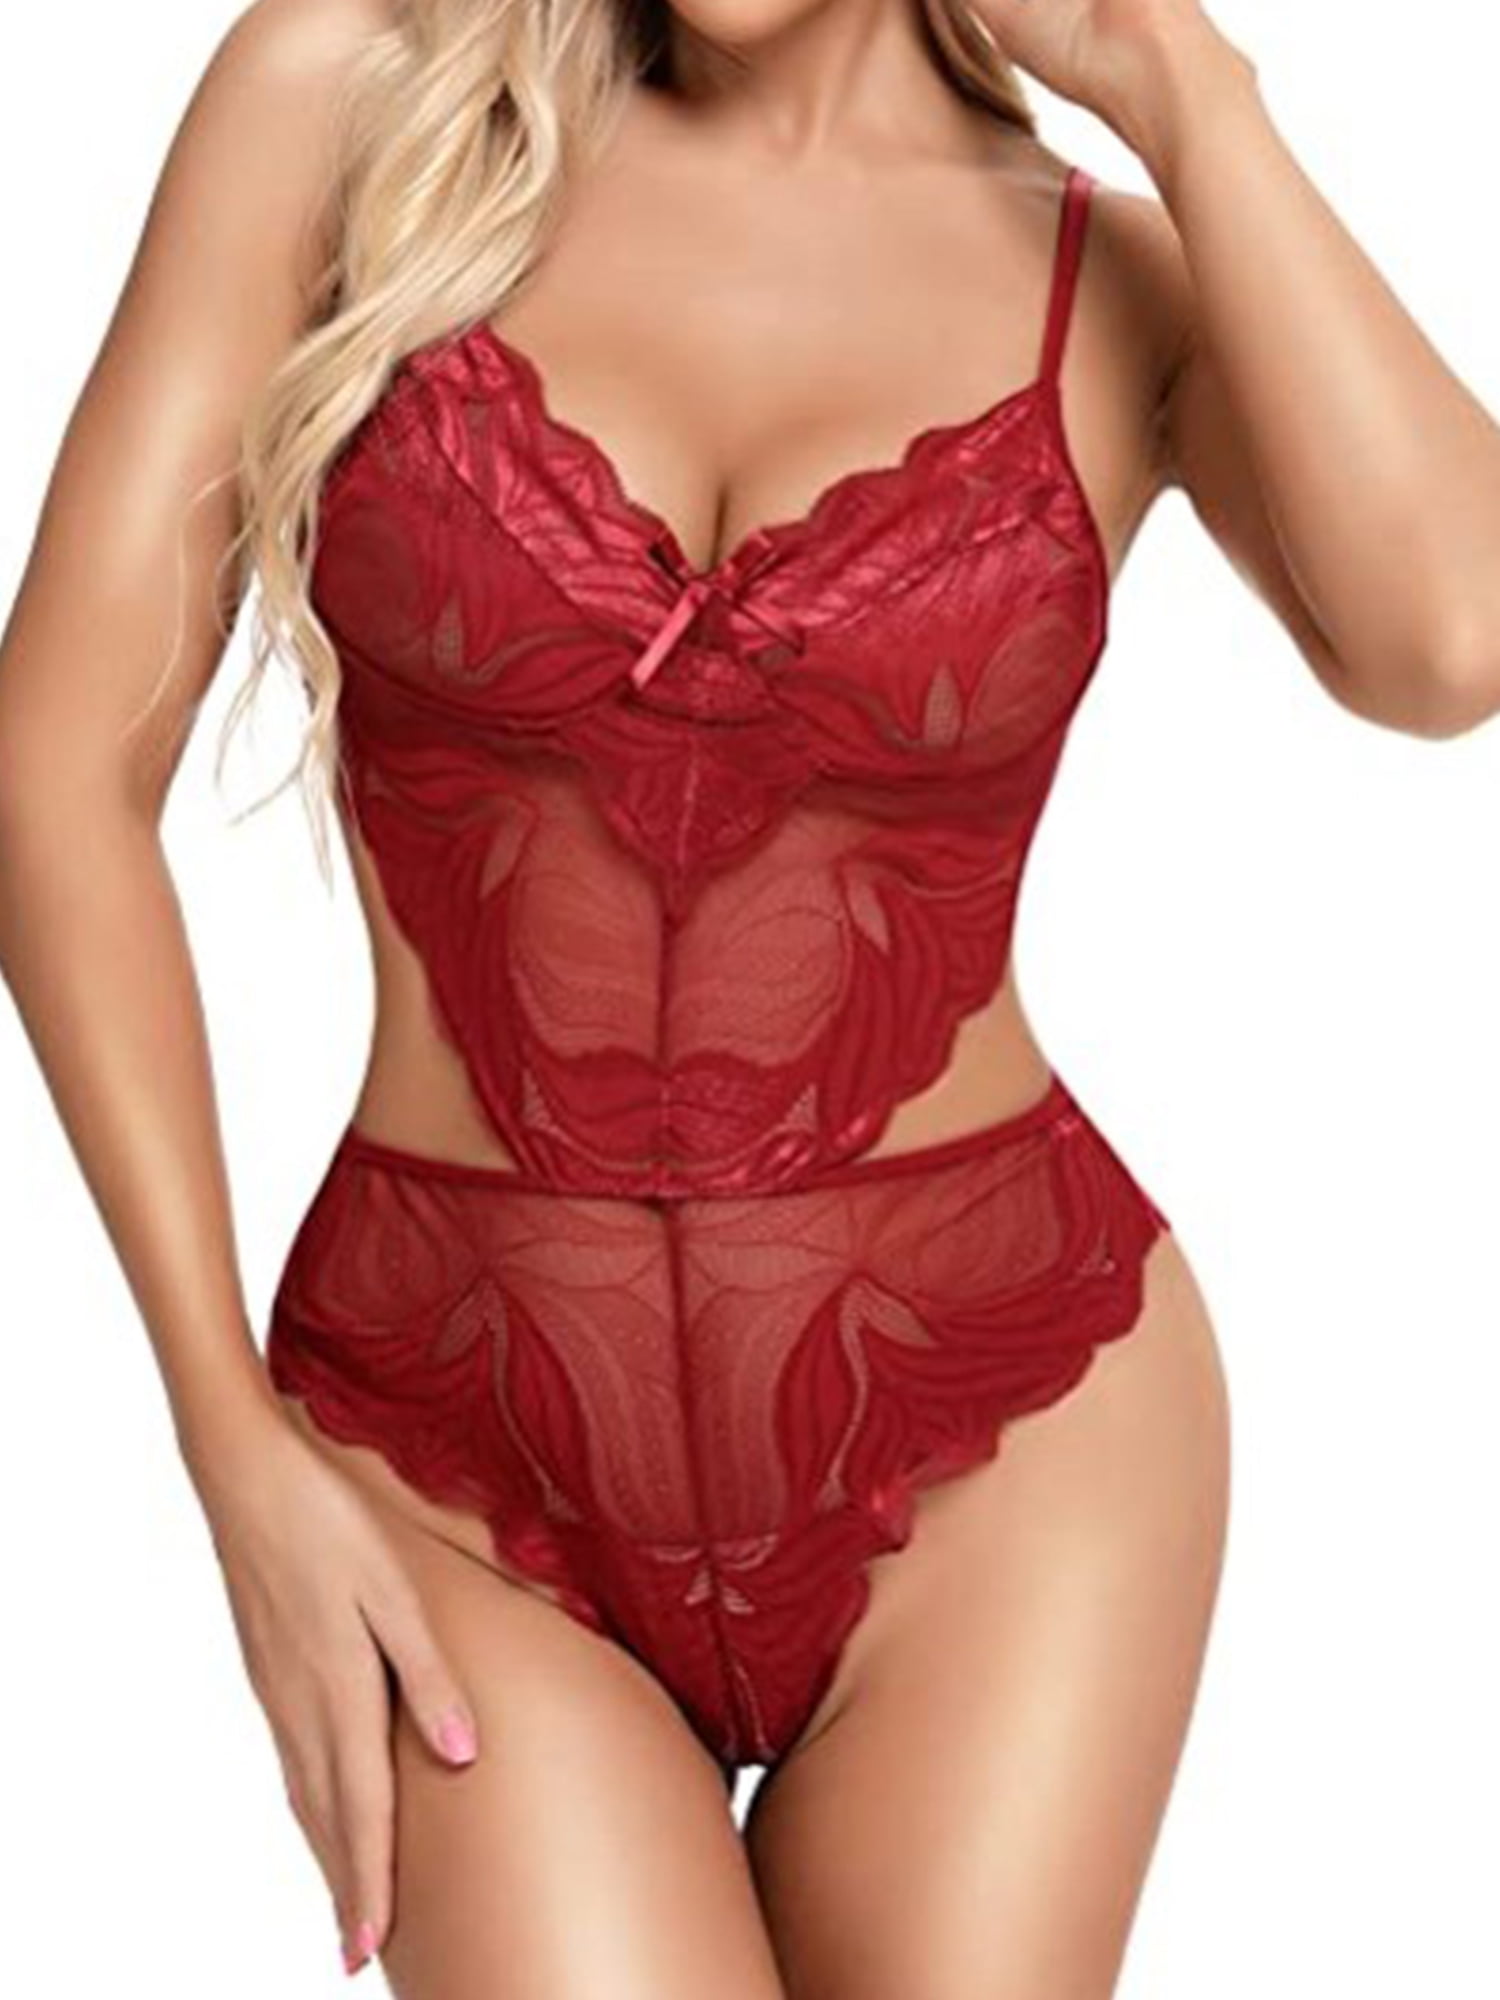 Sexy Lingerie for Women Lace Push-up Top Bra Babydoll Bodysuit